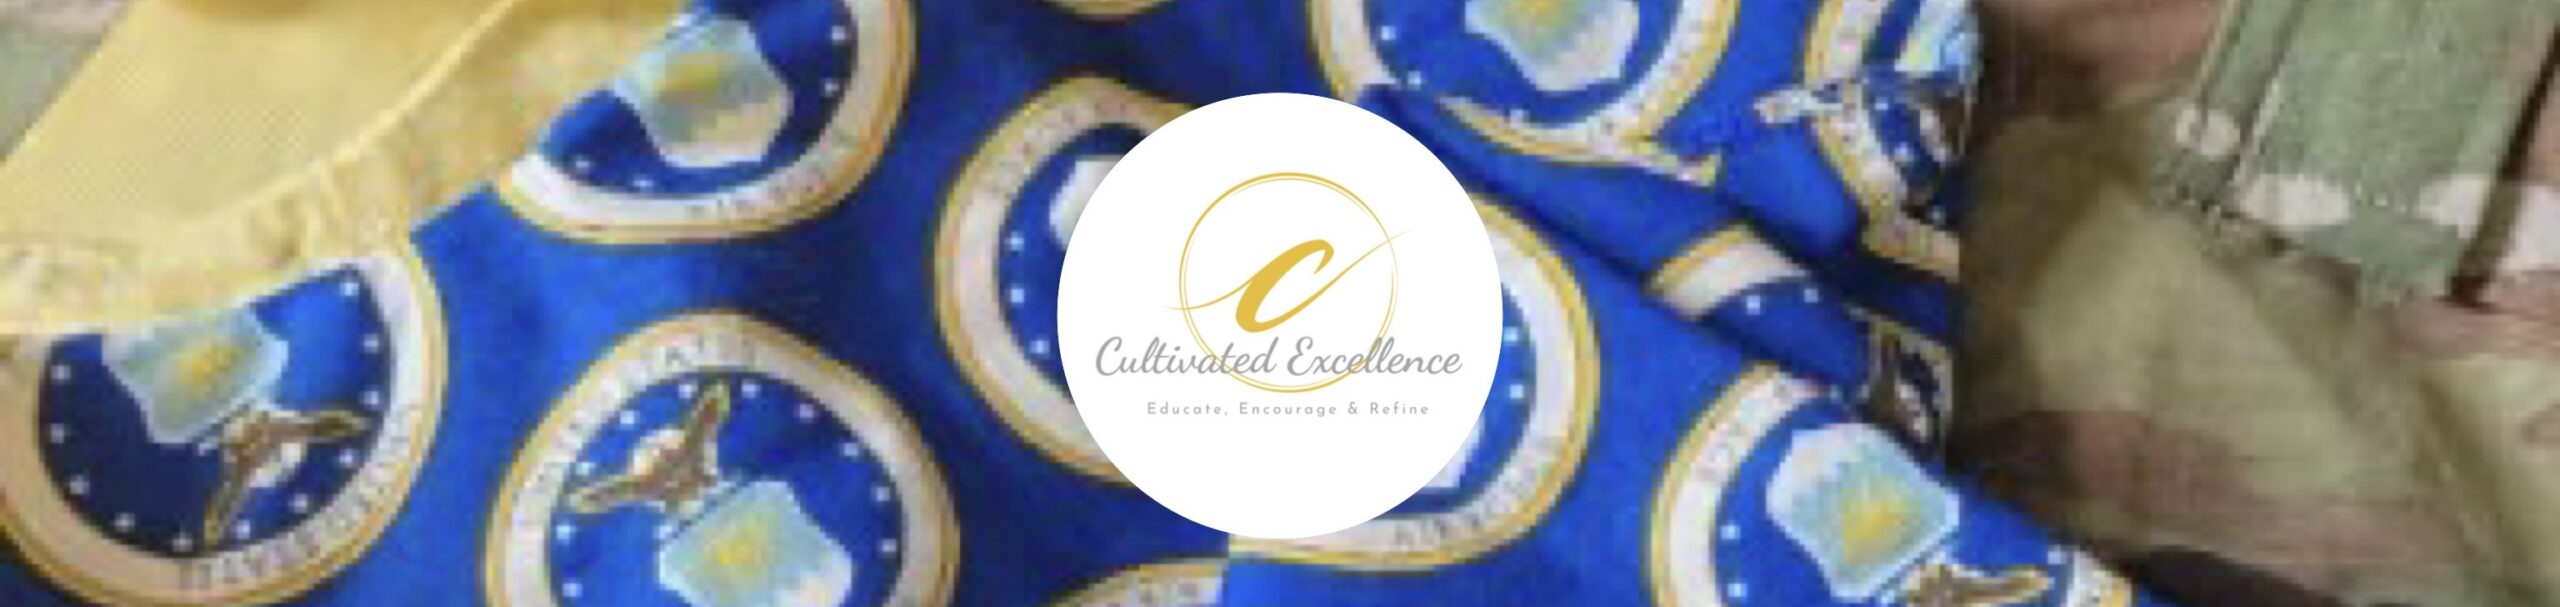 Cultivated Excellence